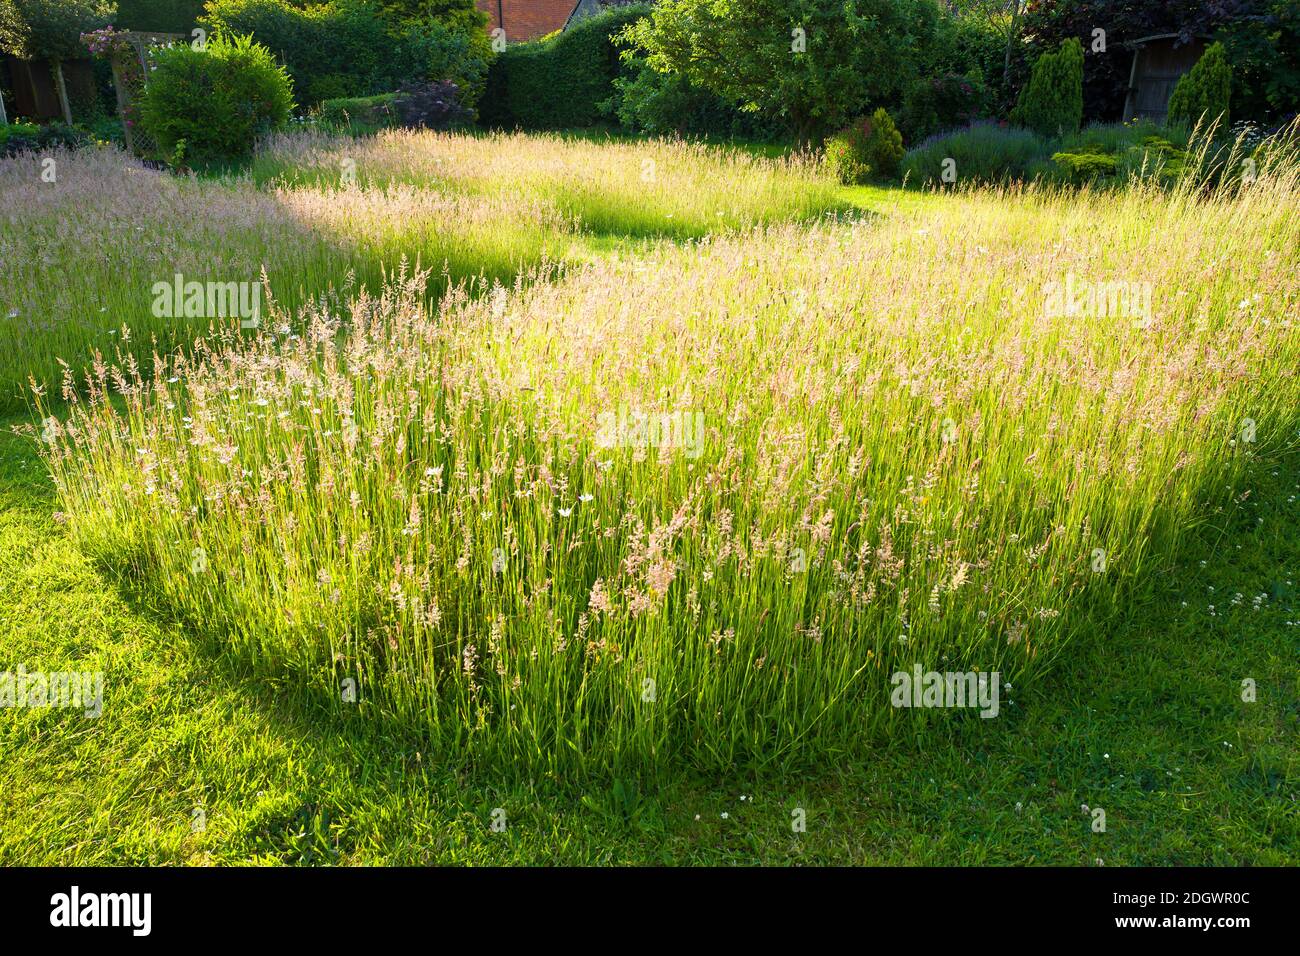 Ornamental effect of flowering lawn grasses allowed remaining uncut during summer; providing a habitat and feeding ground for wildlife Stock Photo